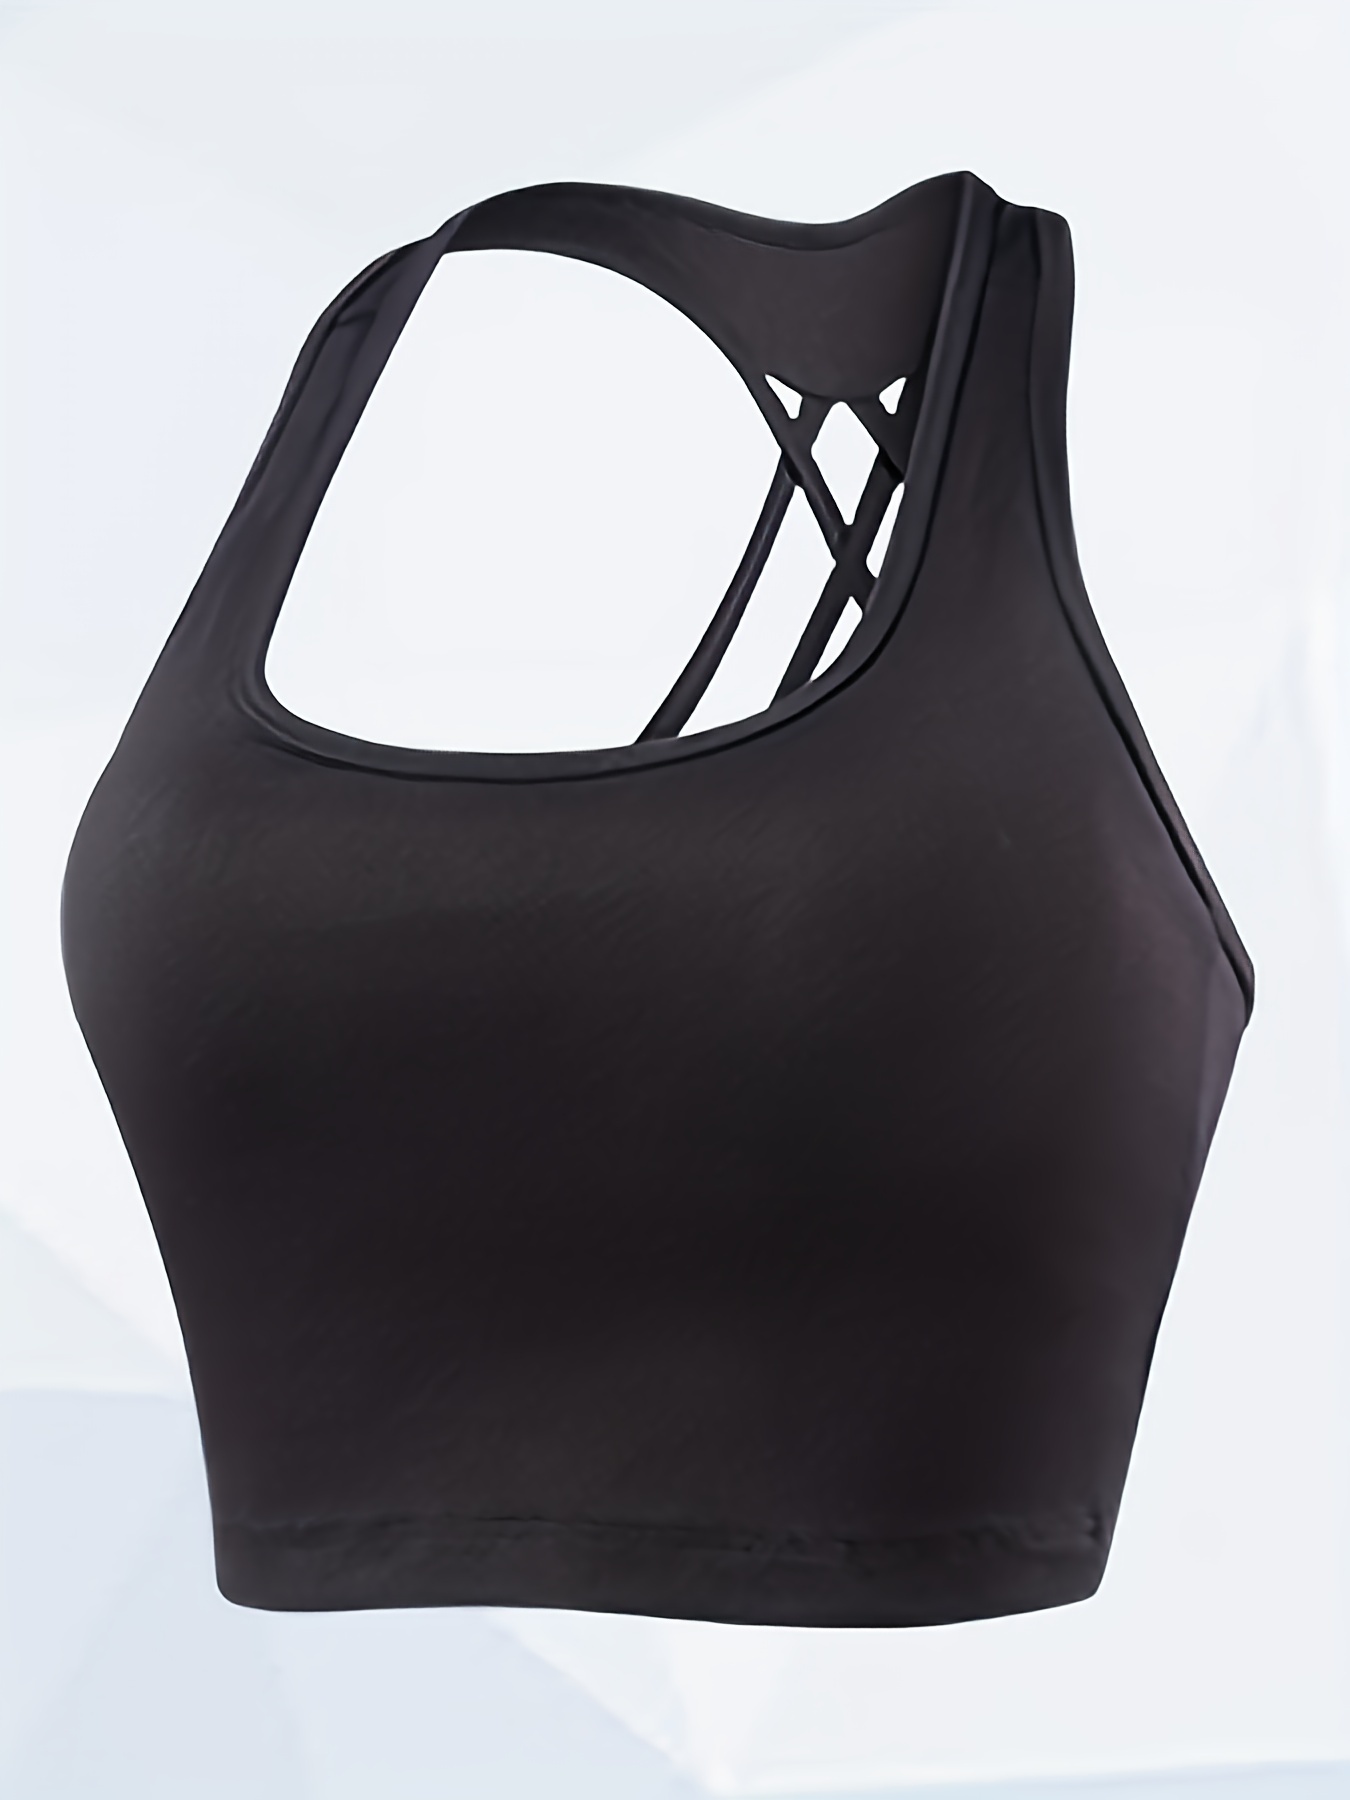 Everyday Yoga Women's Crop Top, Racer Back, Strappy Supportive Bras - Cool,  Breathable, Seamless - Black - X-Small at  Women's Clothing store